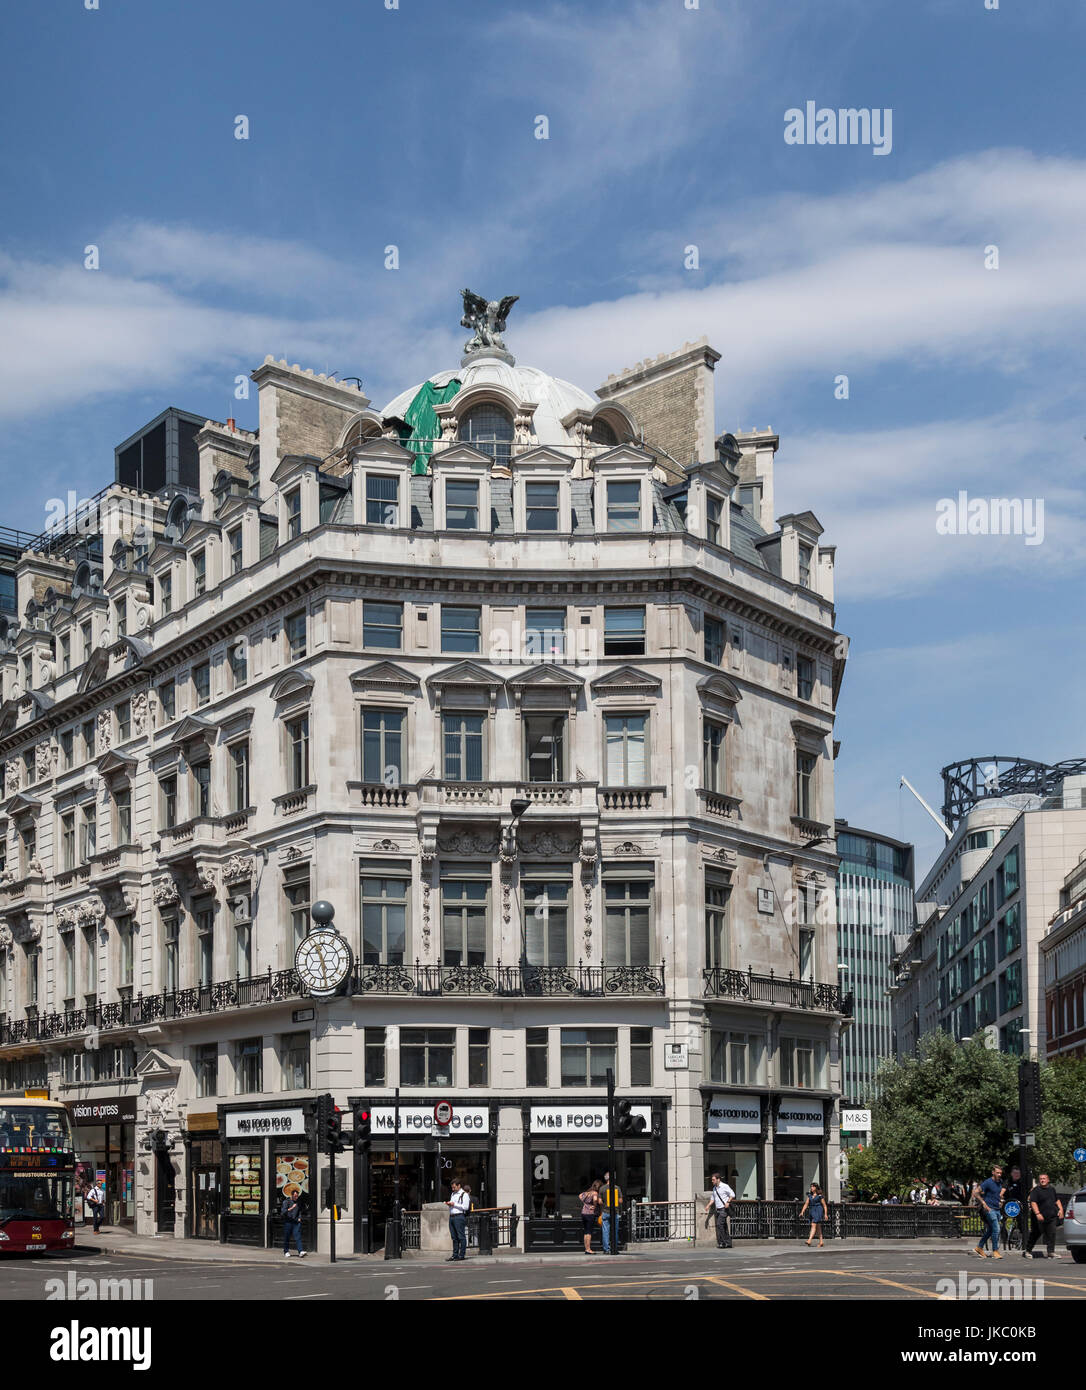 Front of and entrance to an M&S Food To Go shop (Marks and Spencer) in Ludgate Circus in central London, England, UK. Stock Photo